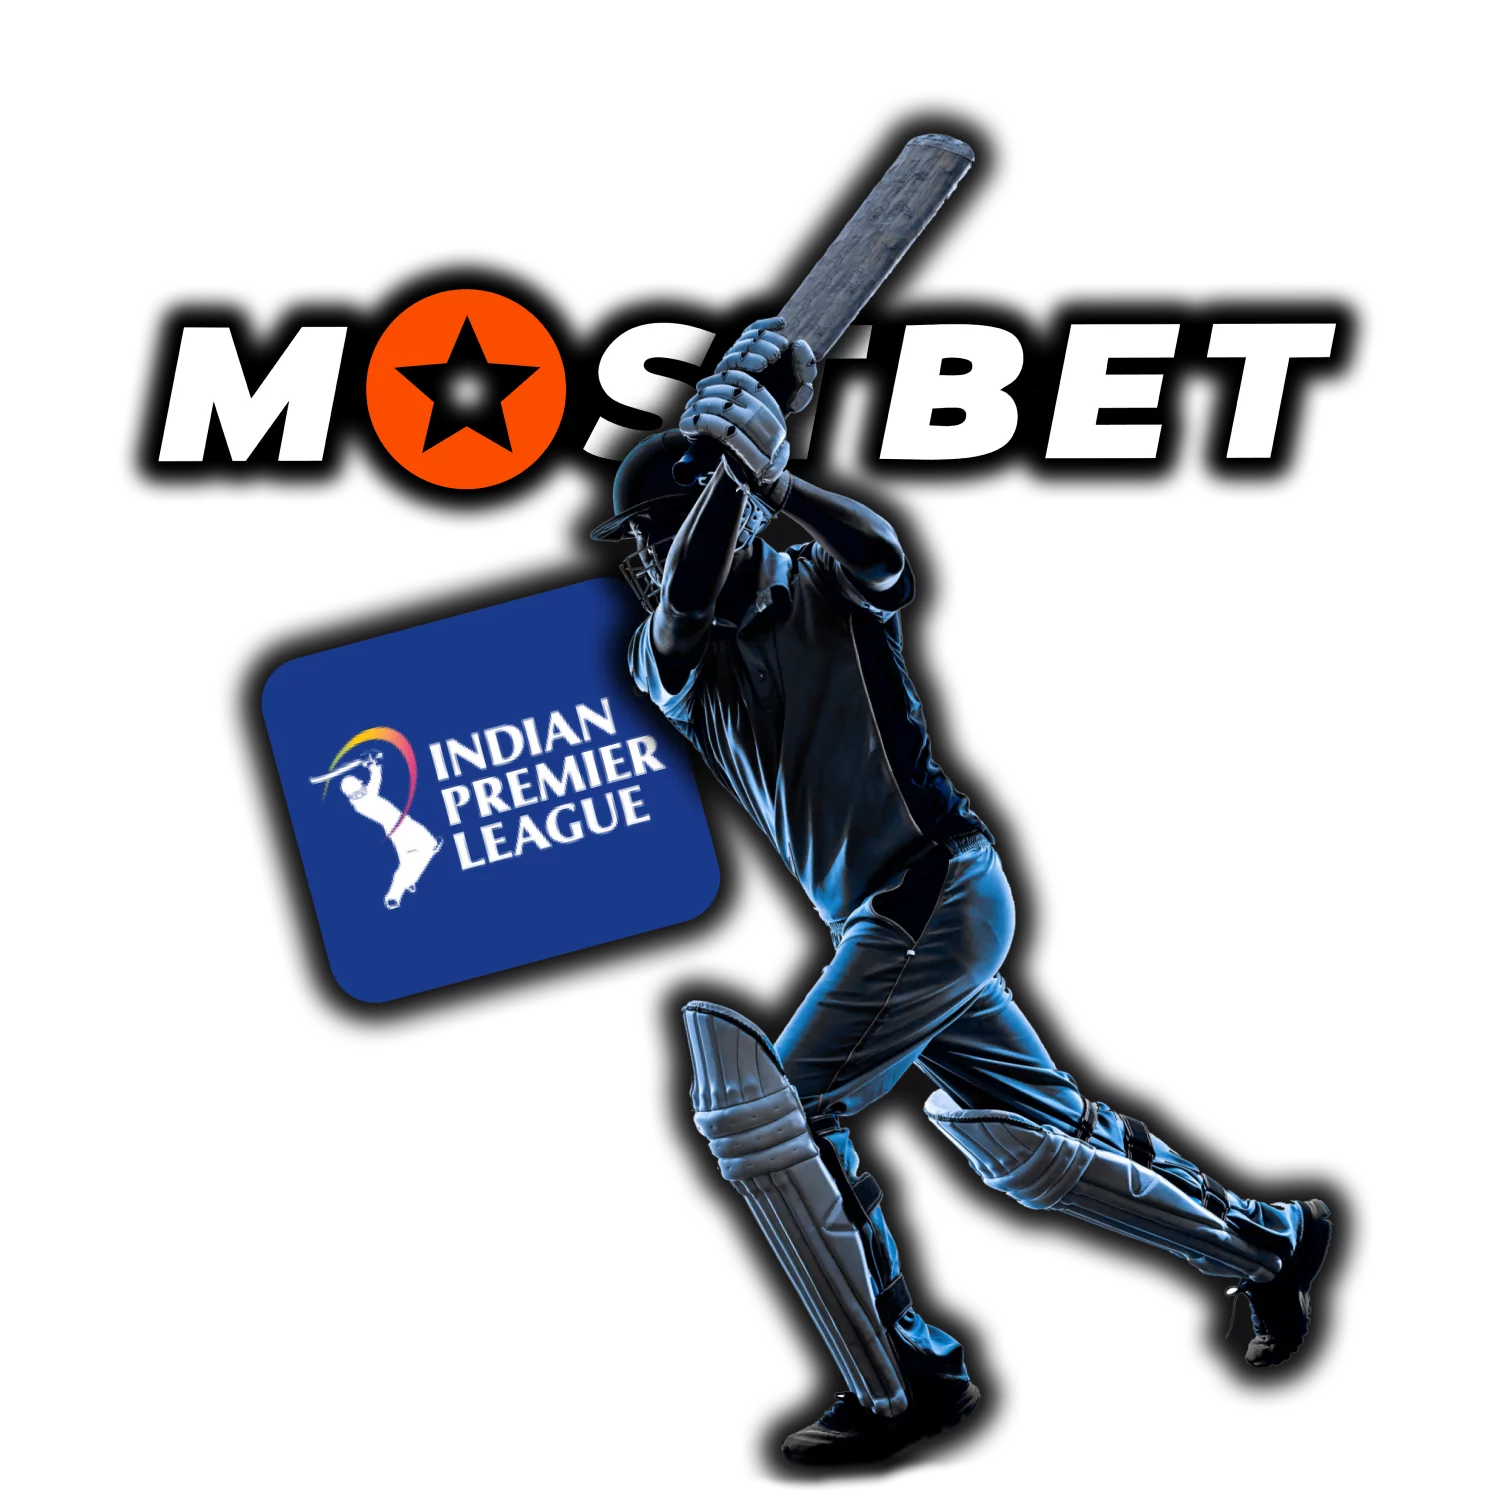 The IPL has already begun, don't miss out on making your winning bet at Mostbet.